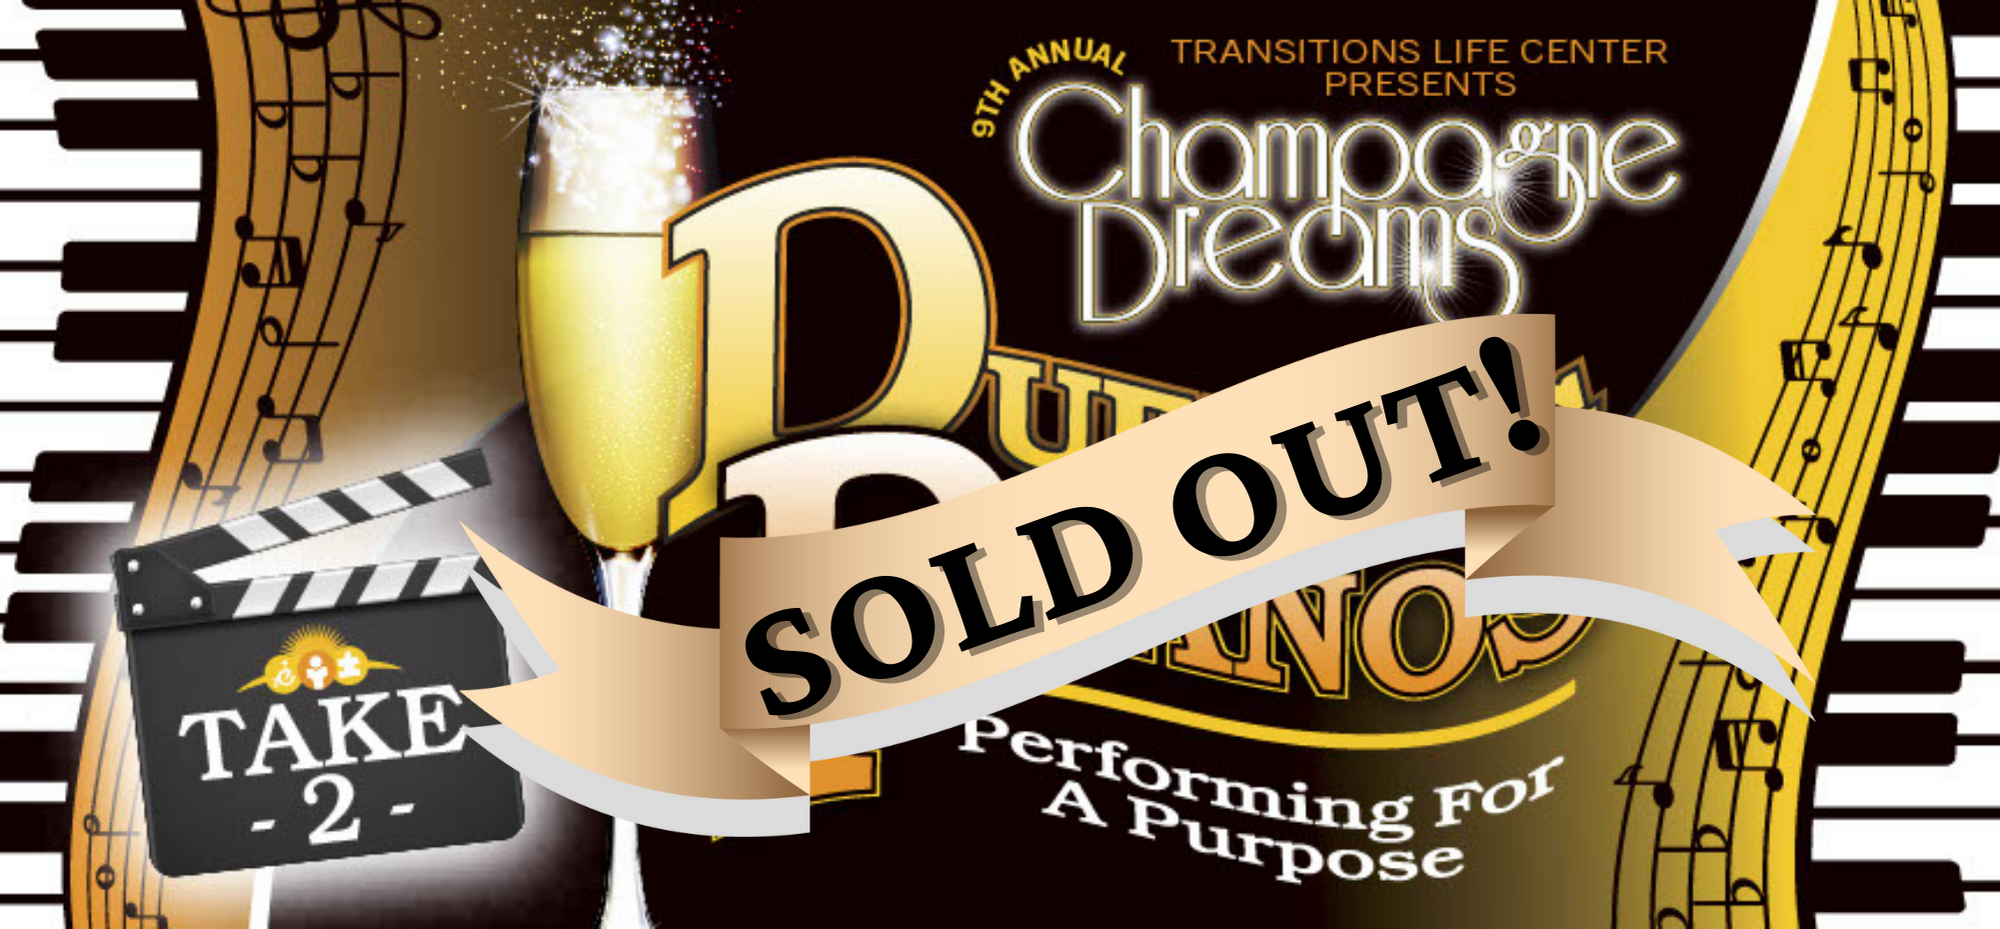 Featured image for “Champagne Dreams Gala”